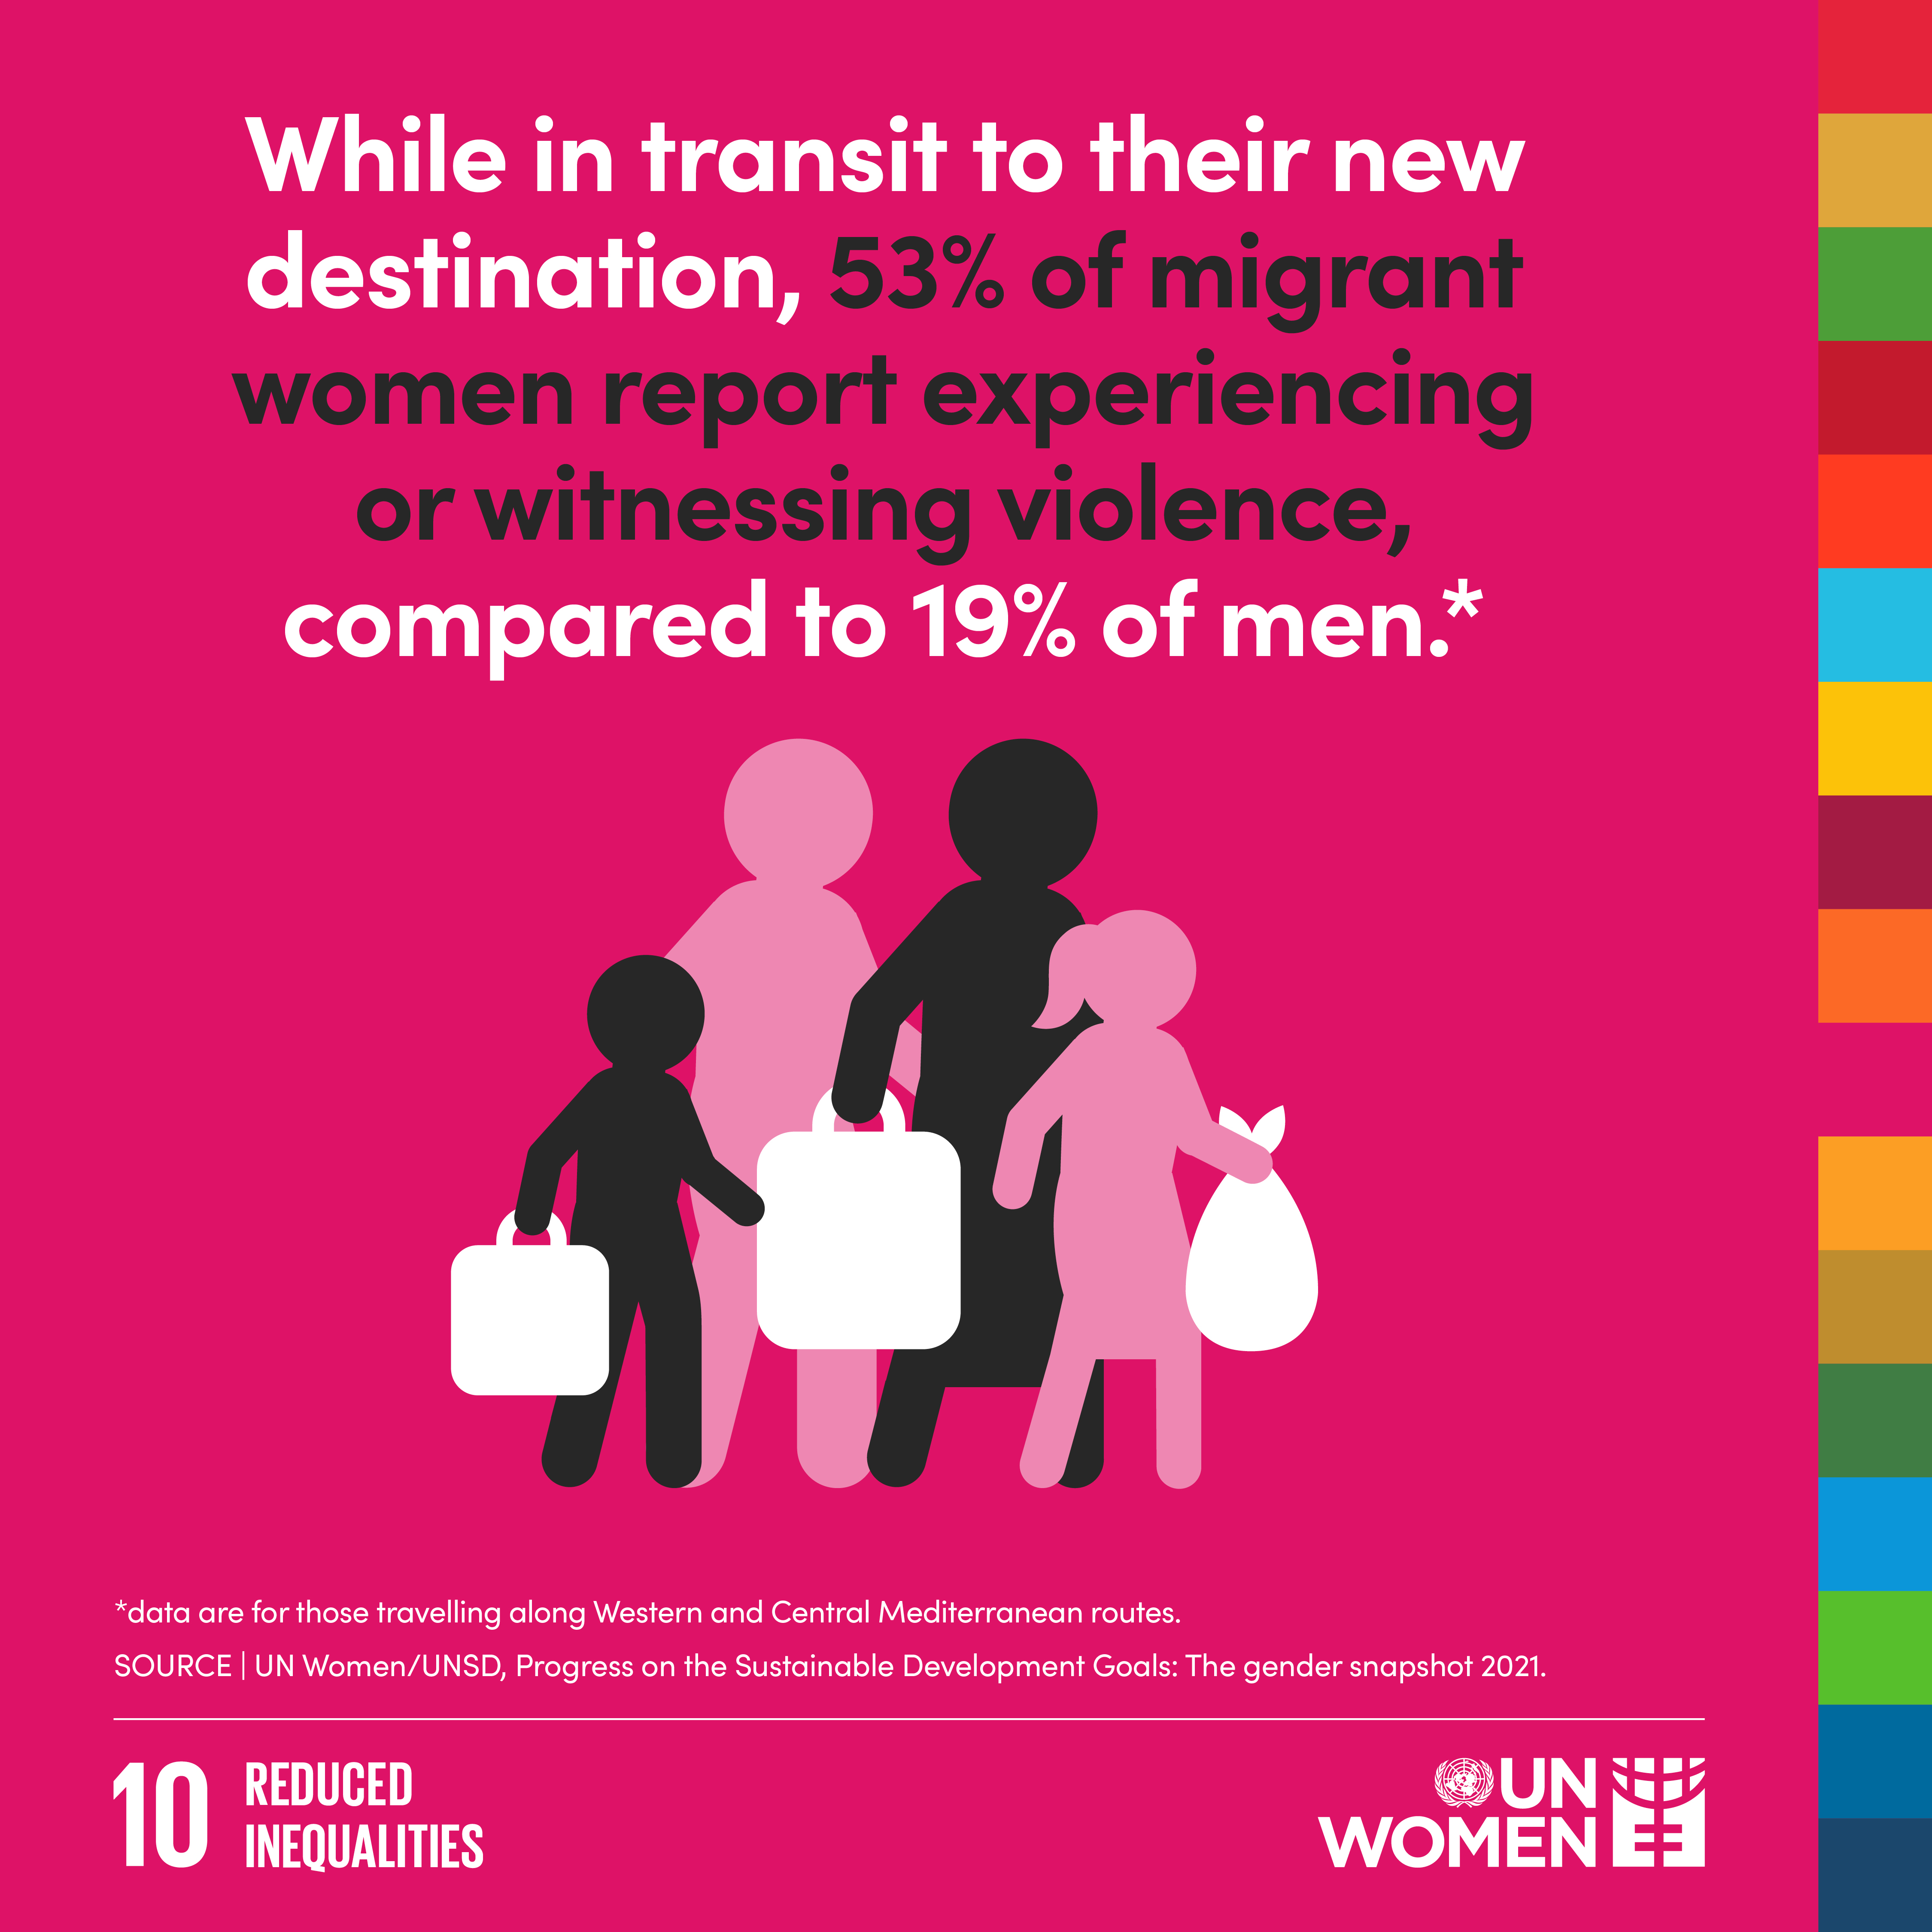 While in transit to their new destination, 53% of migrant women report experiencing or witnessing violence, compared to 19% of men.